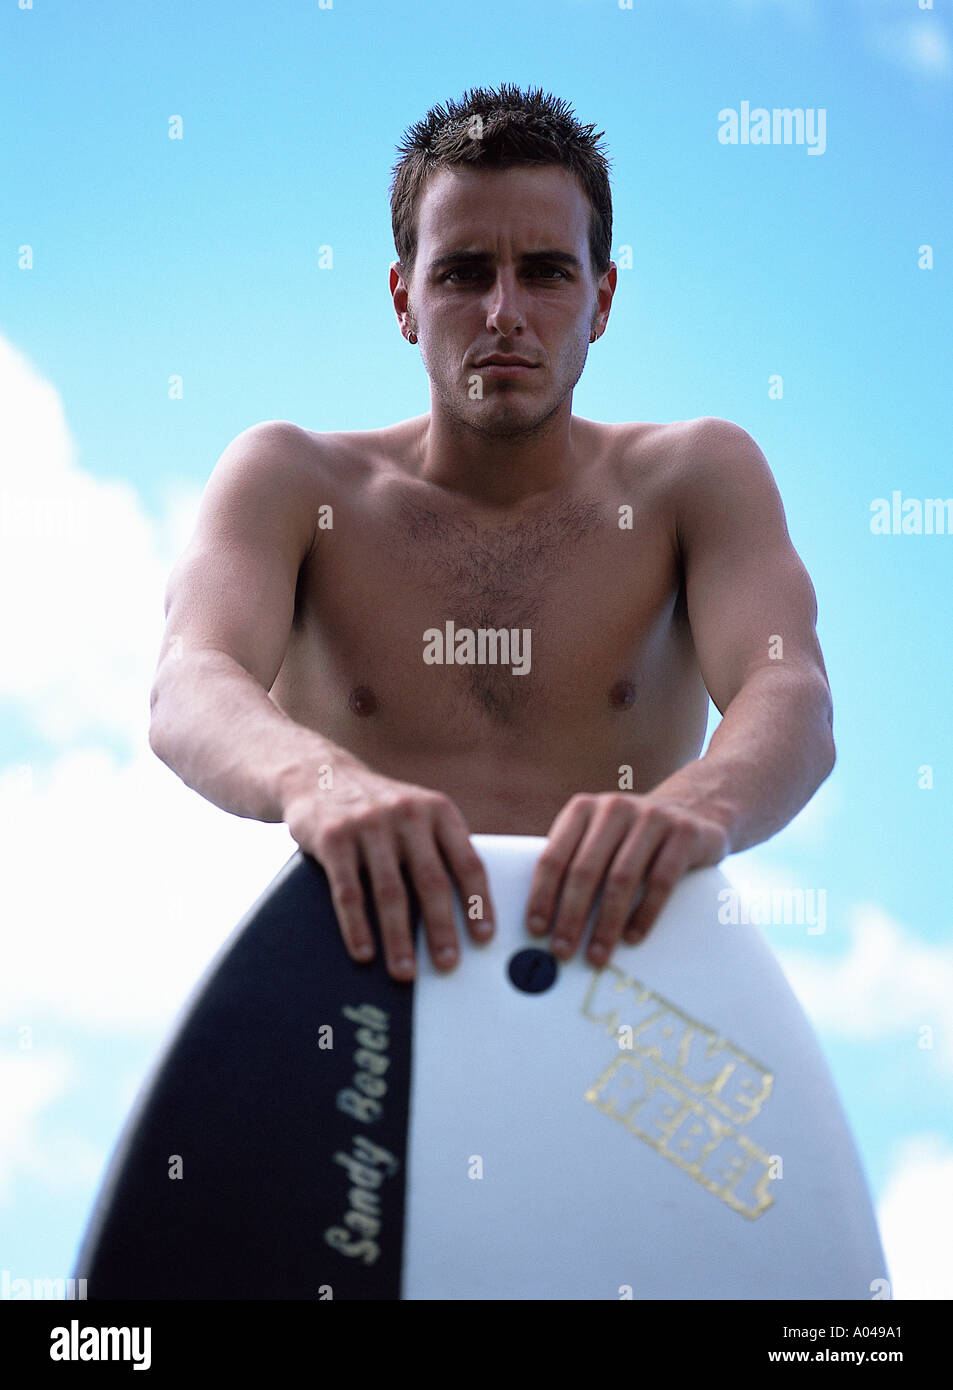 Portrait of a young man standing behind a surfboard  looking at the camera Stock Photo